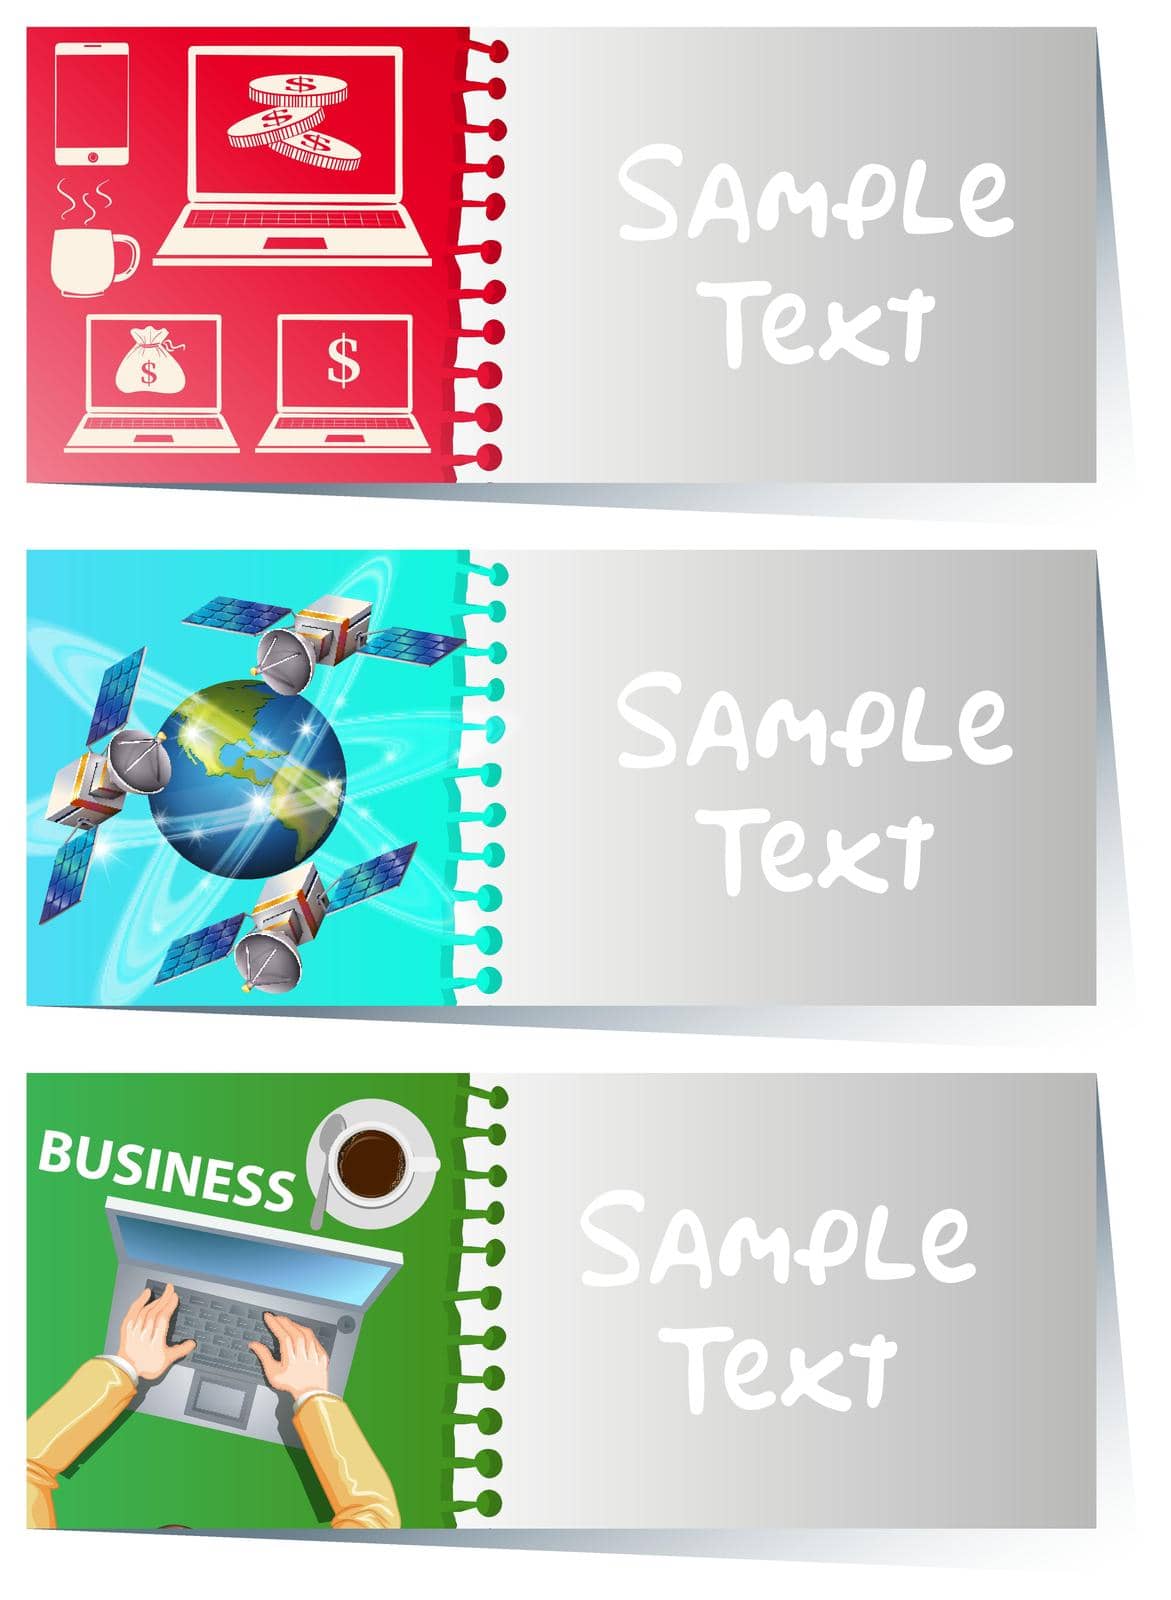 Businesscard template with business items illustration